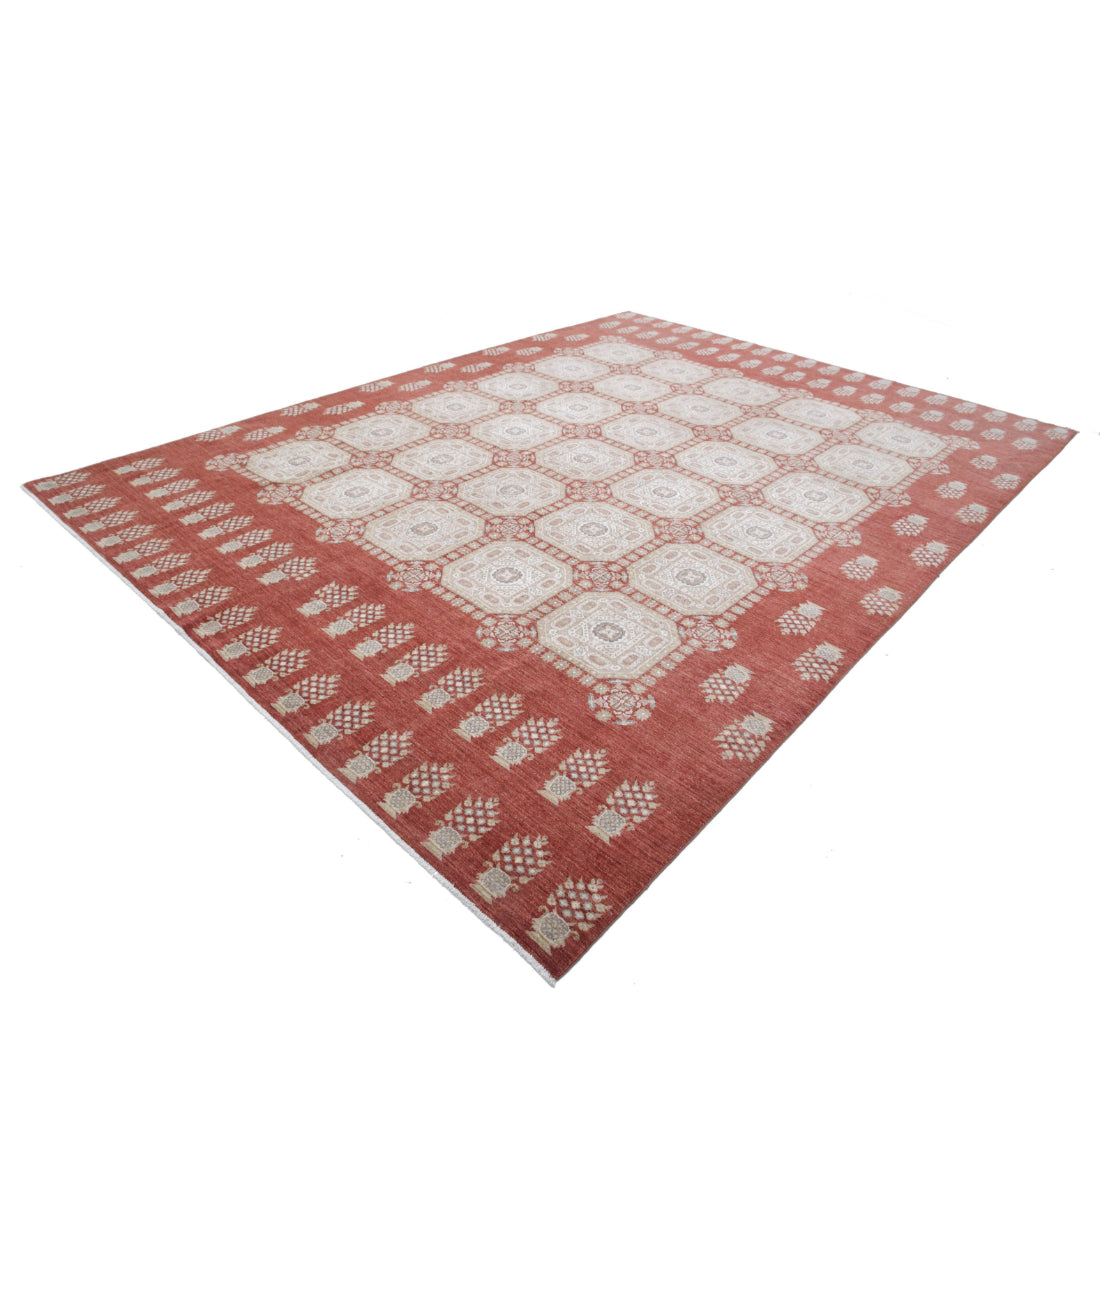 Ziegler 9'9'' X 13'4'' Hand-Knotted Wool Rug 9'9'' x 13'4'' (293 X 400) / Rust / Taupe